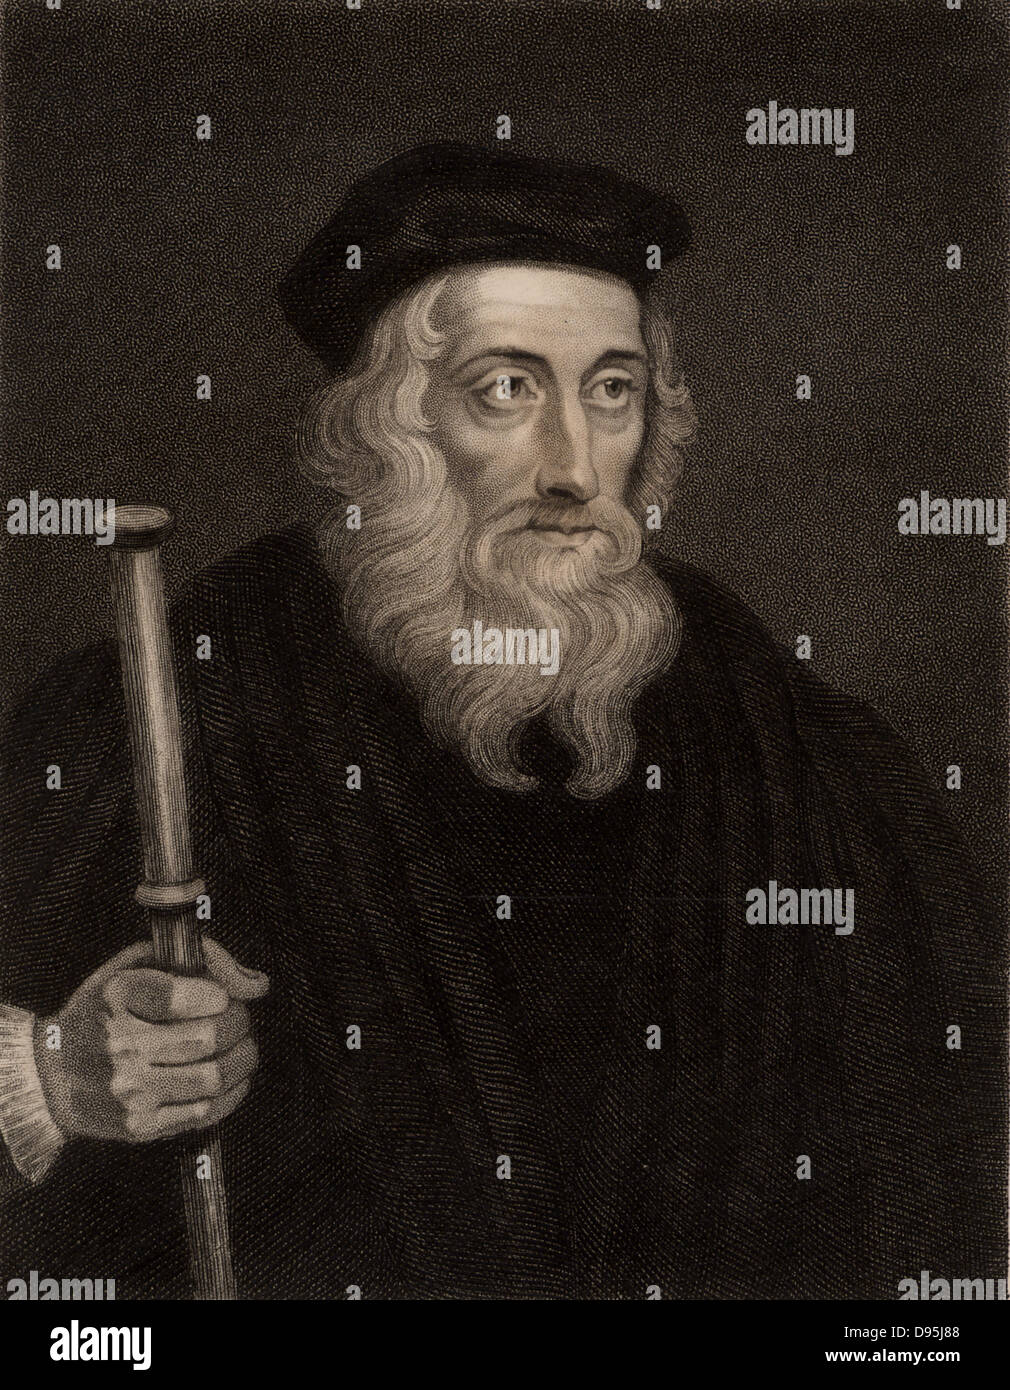 John Wycliffe (c1329-1384) English religious reformer.  Leader of the Lollards (Mumblers).  Questioned the doctrine of transubstantiation. Organised the  translation of Bible into English.  Precursor of Protestant Reformation. Engraving. Religion. Christi Stock Photo